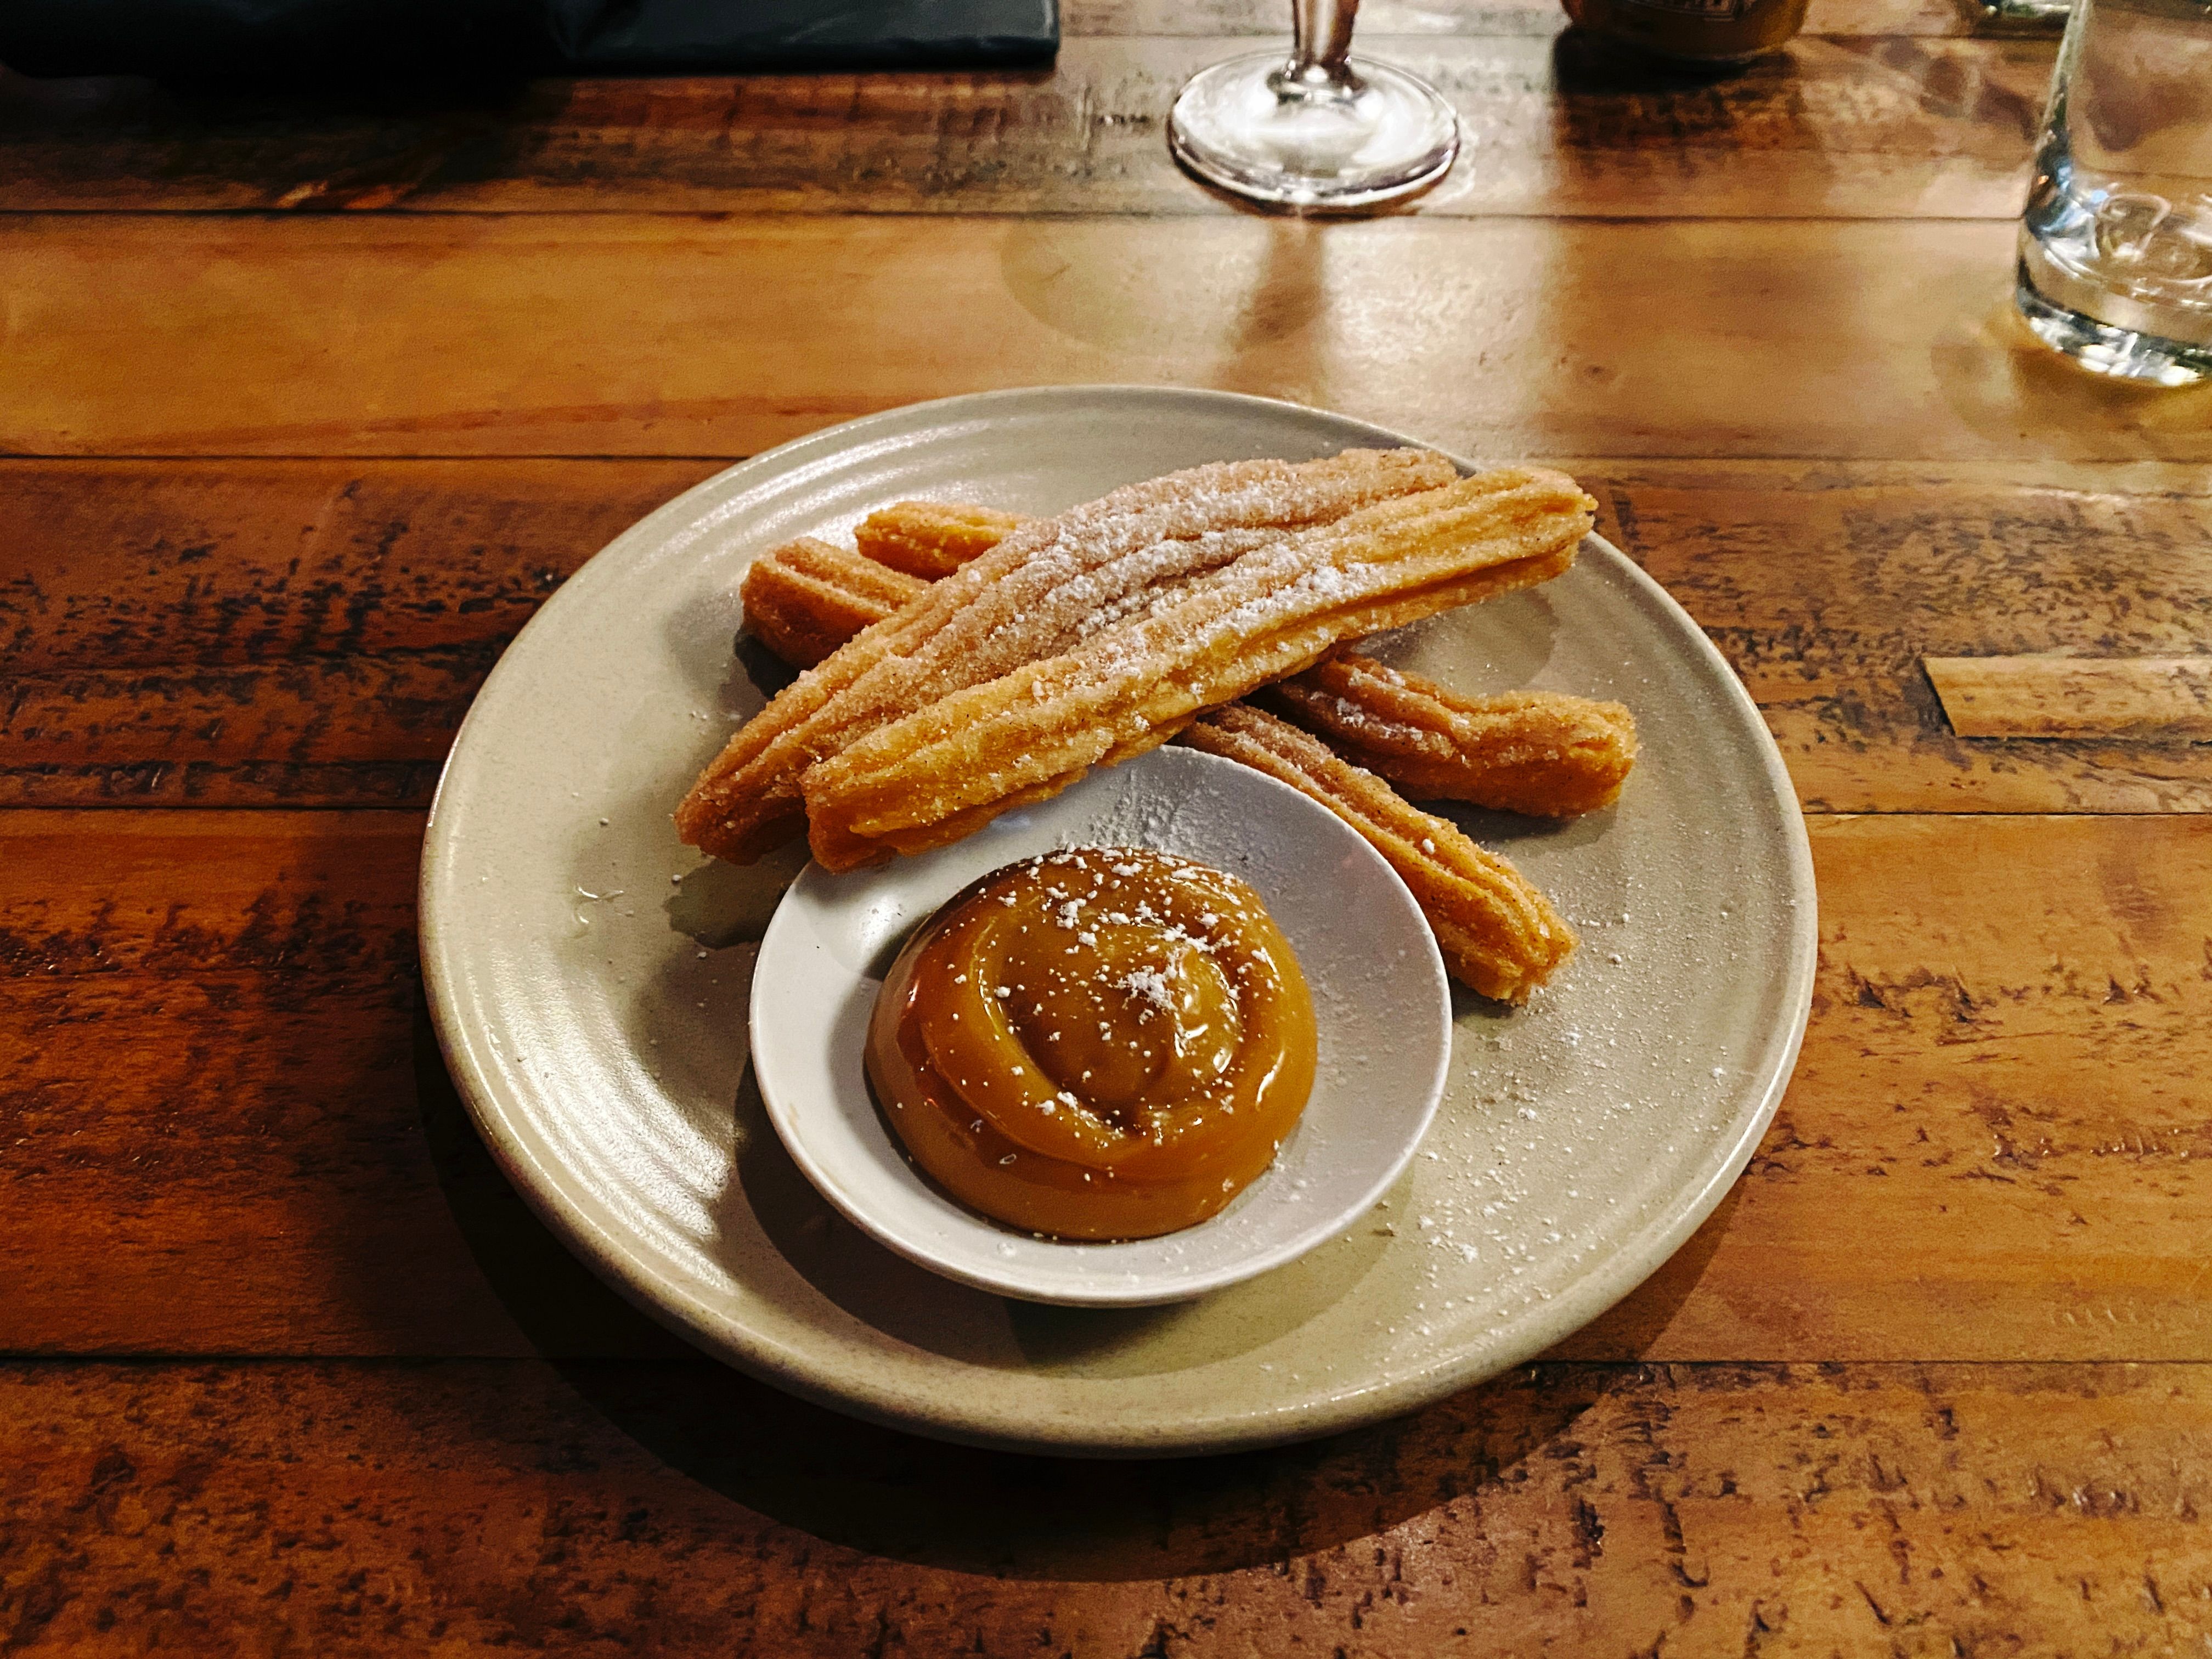 Four churros on a plate with a small saucer of dulche de leche.